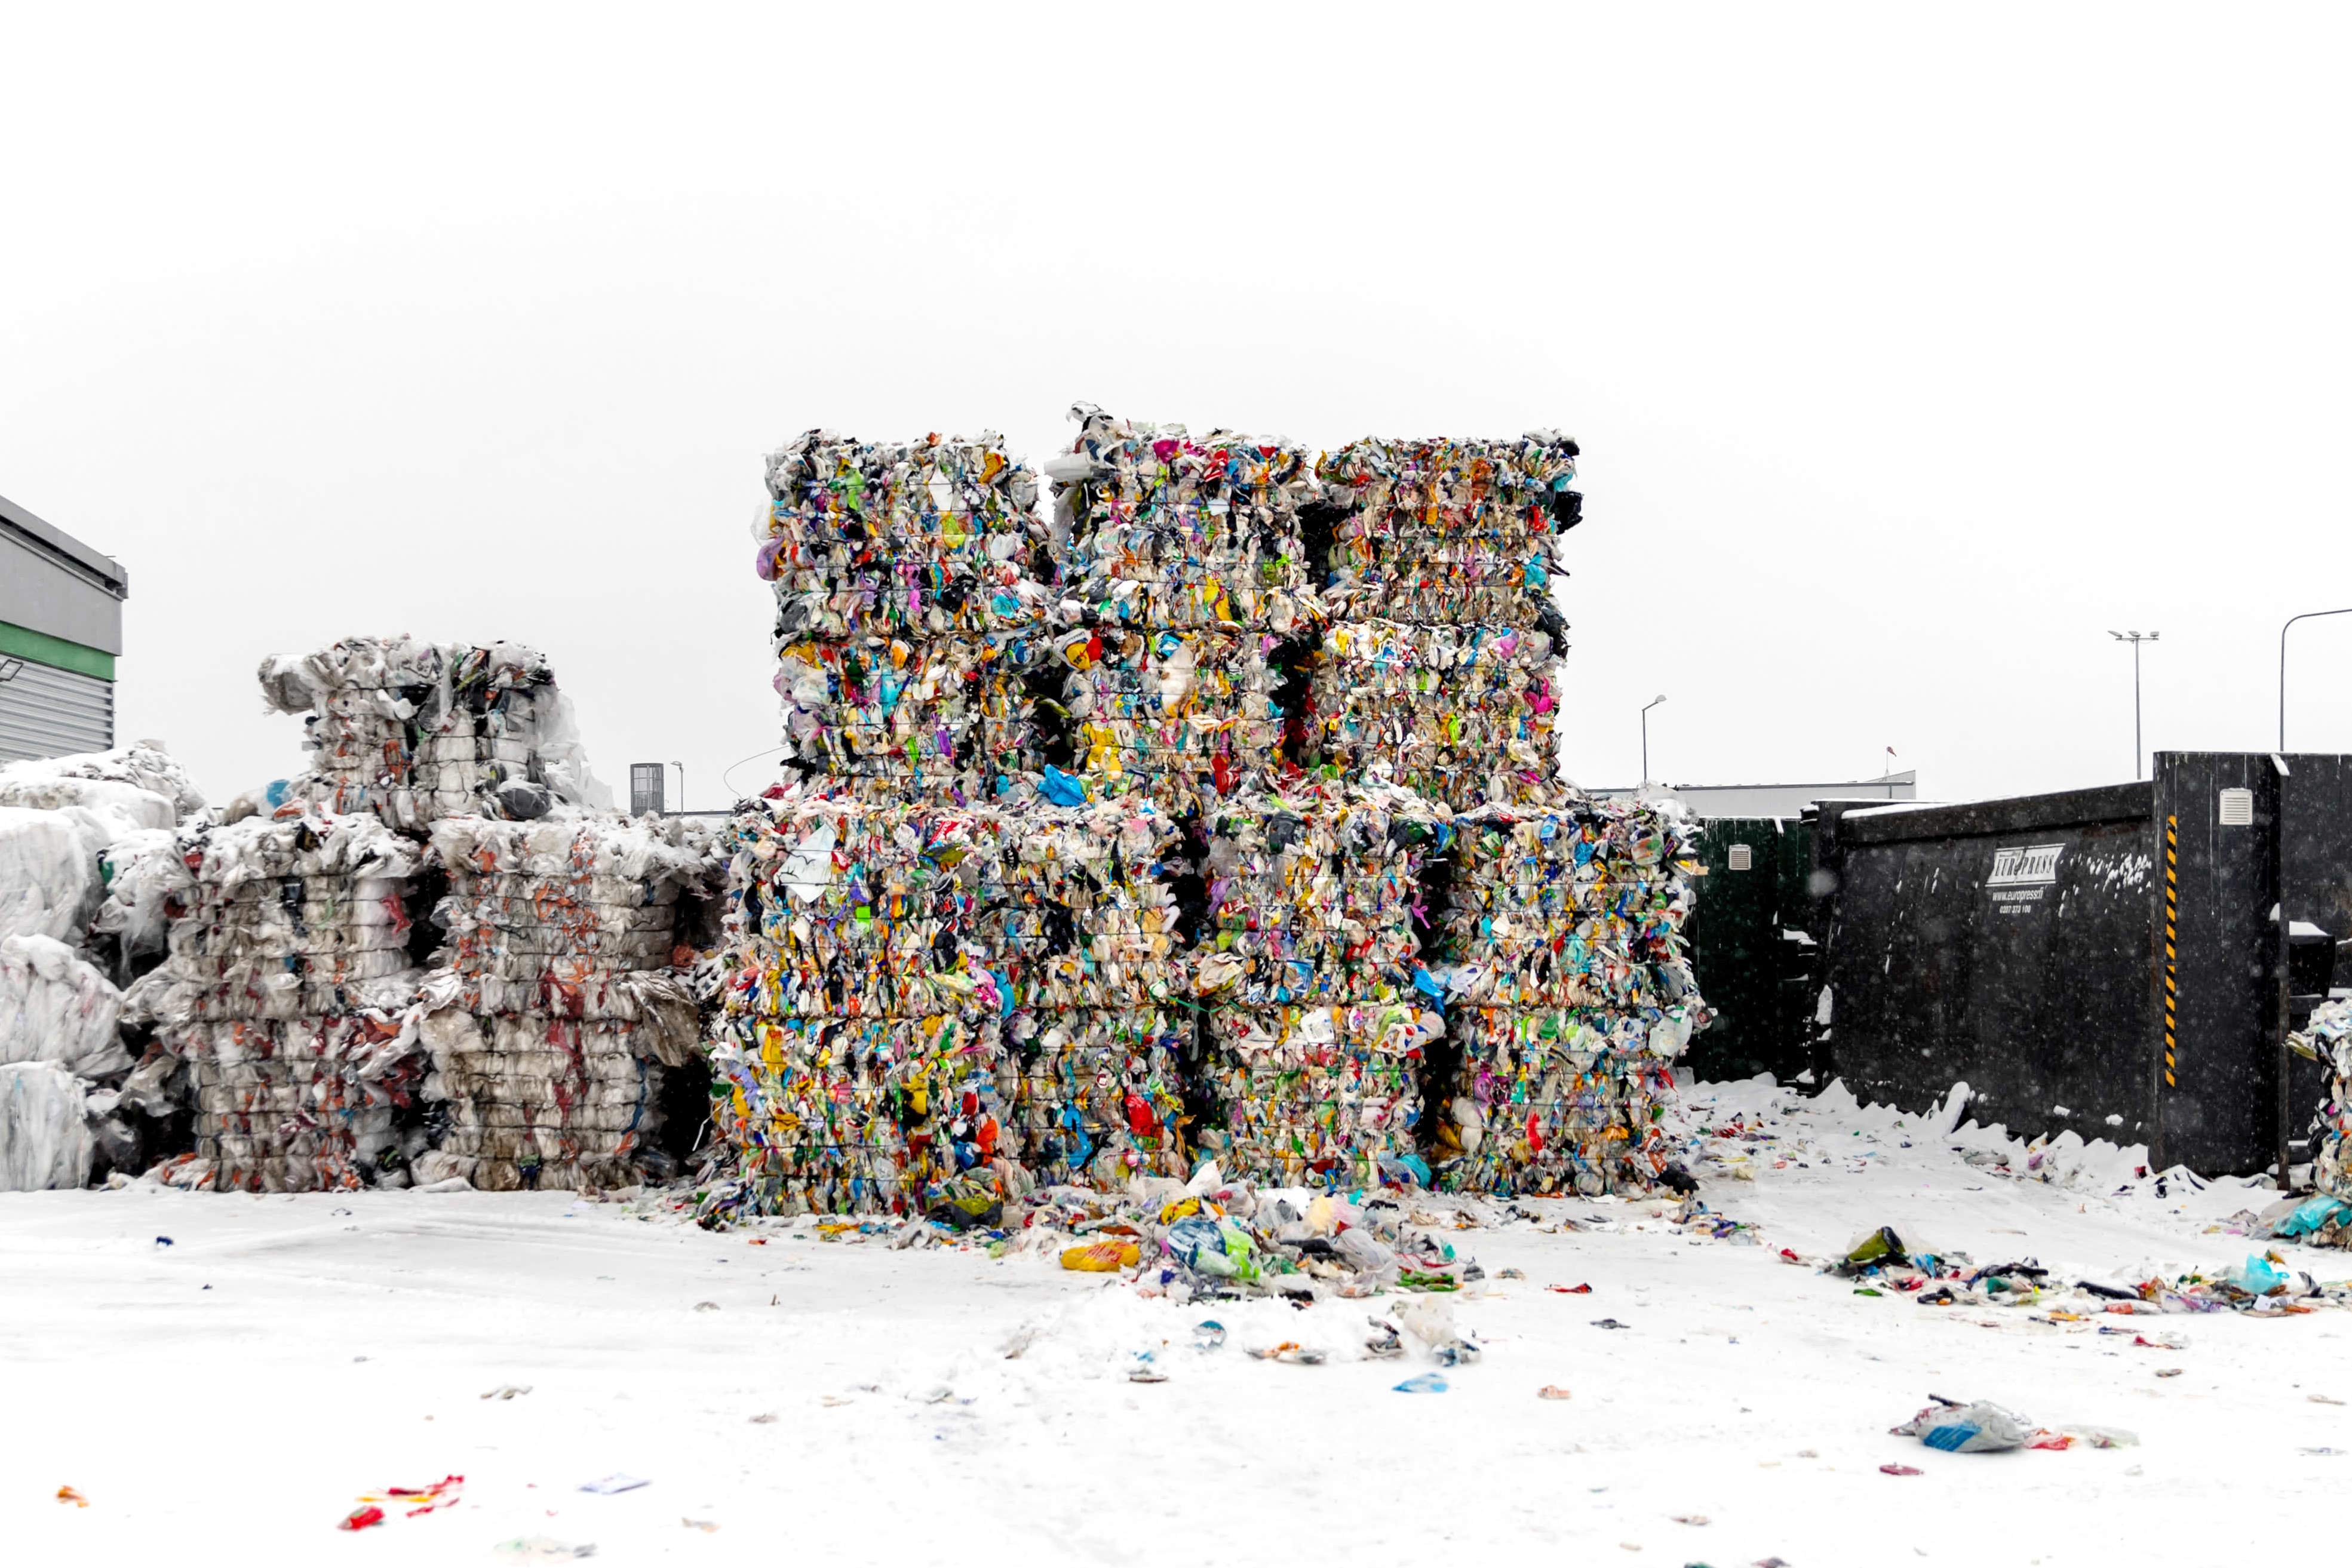 Report: Most of the incinerated sorted plastic waste